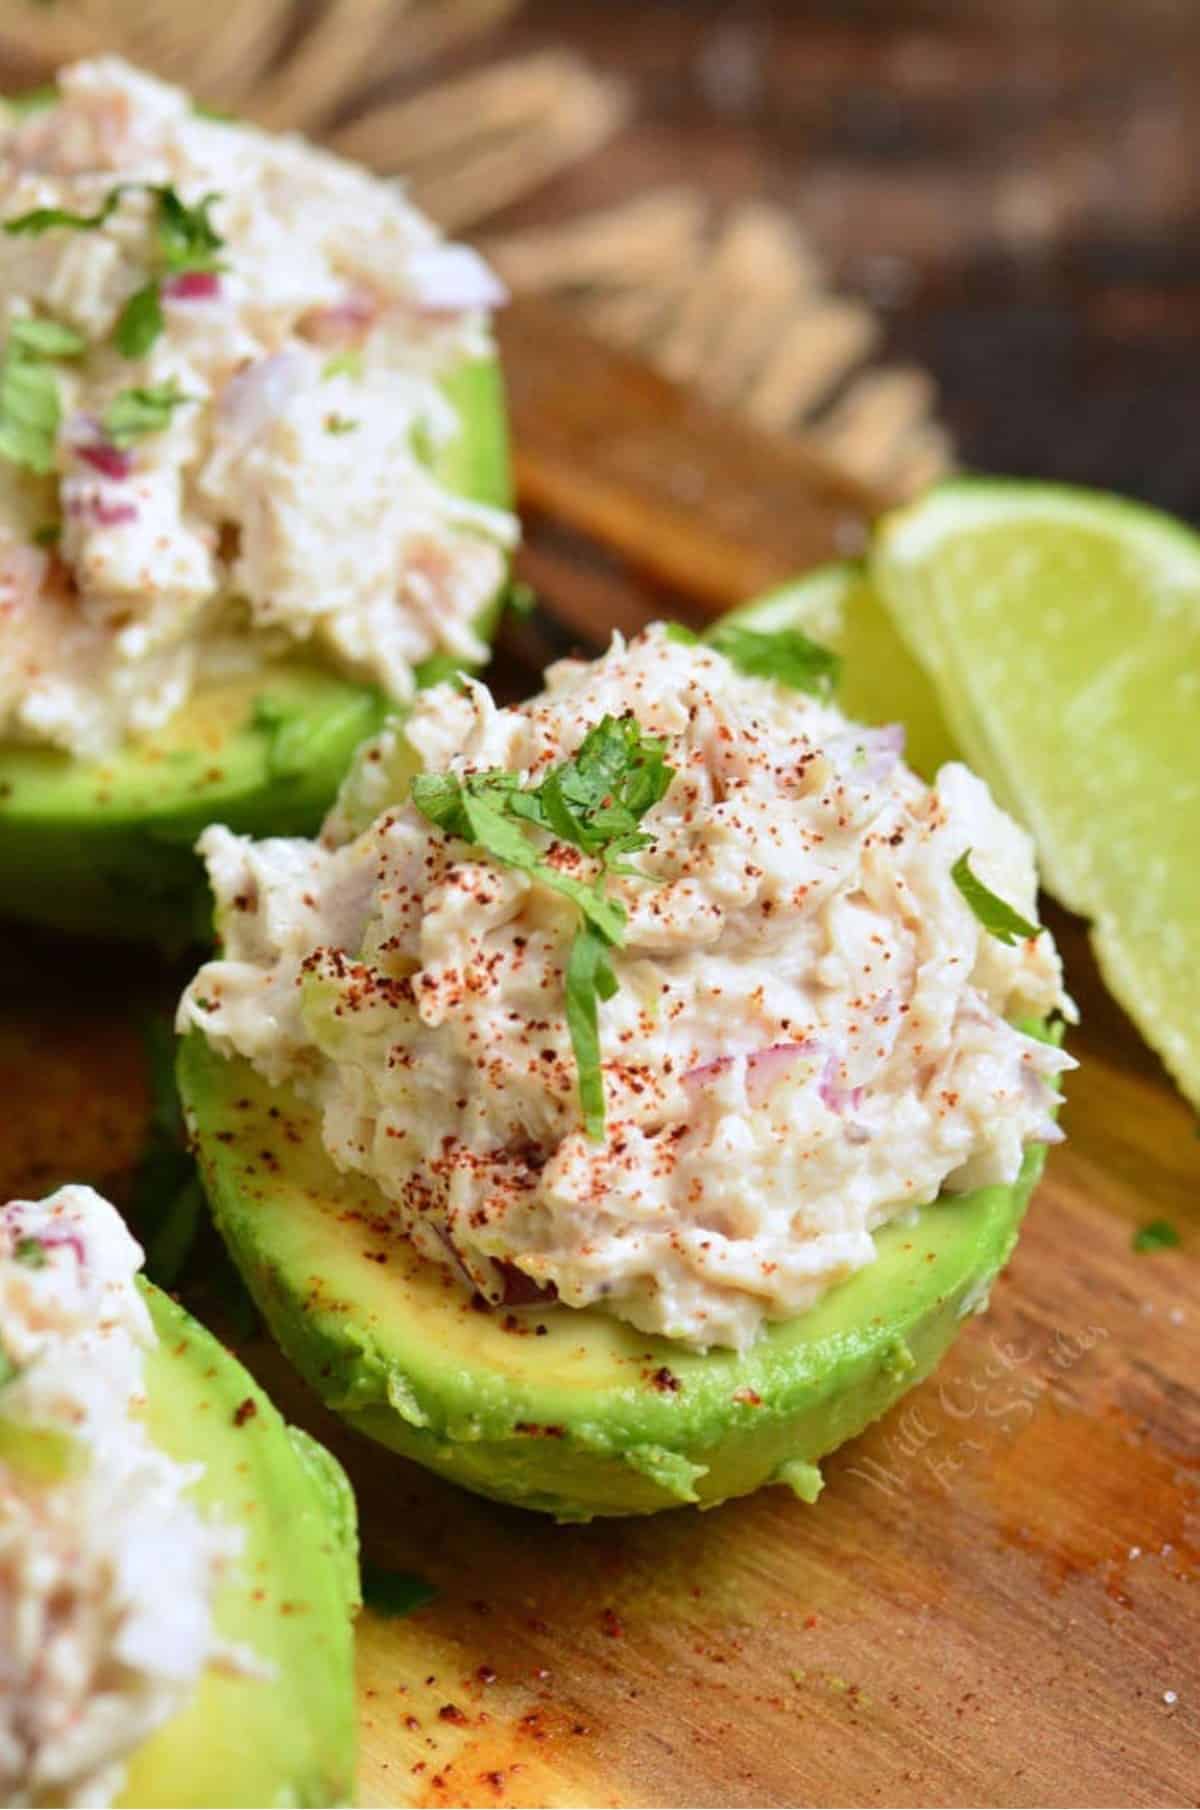 avocado half stuffed with chicken salad and topped with parsley and a lime wedge next to it.